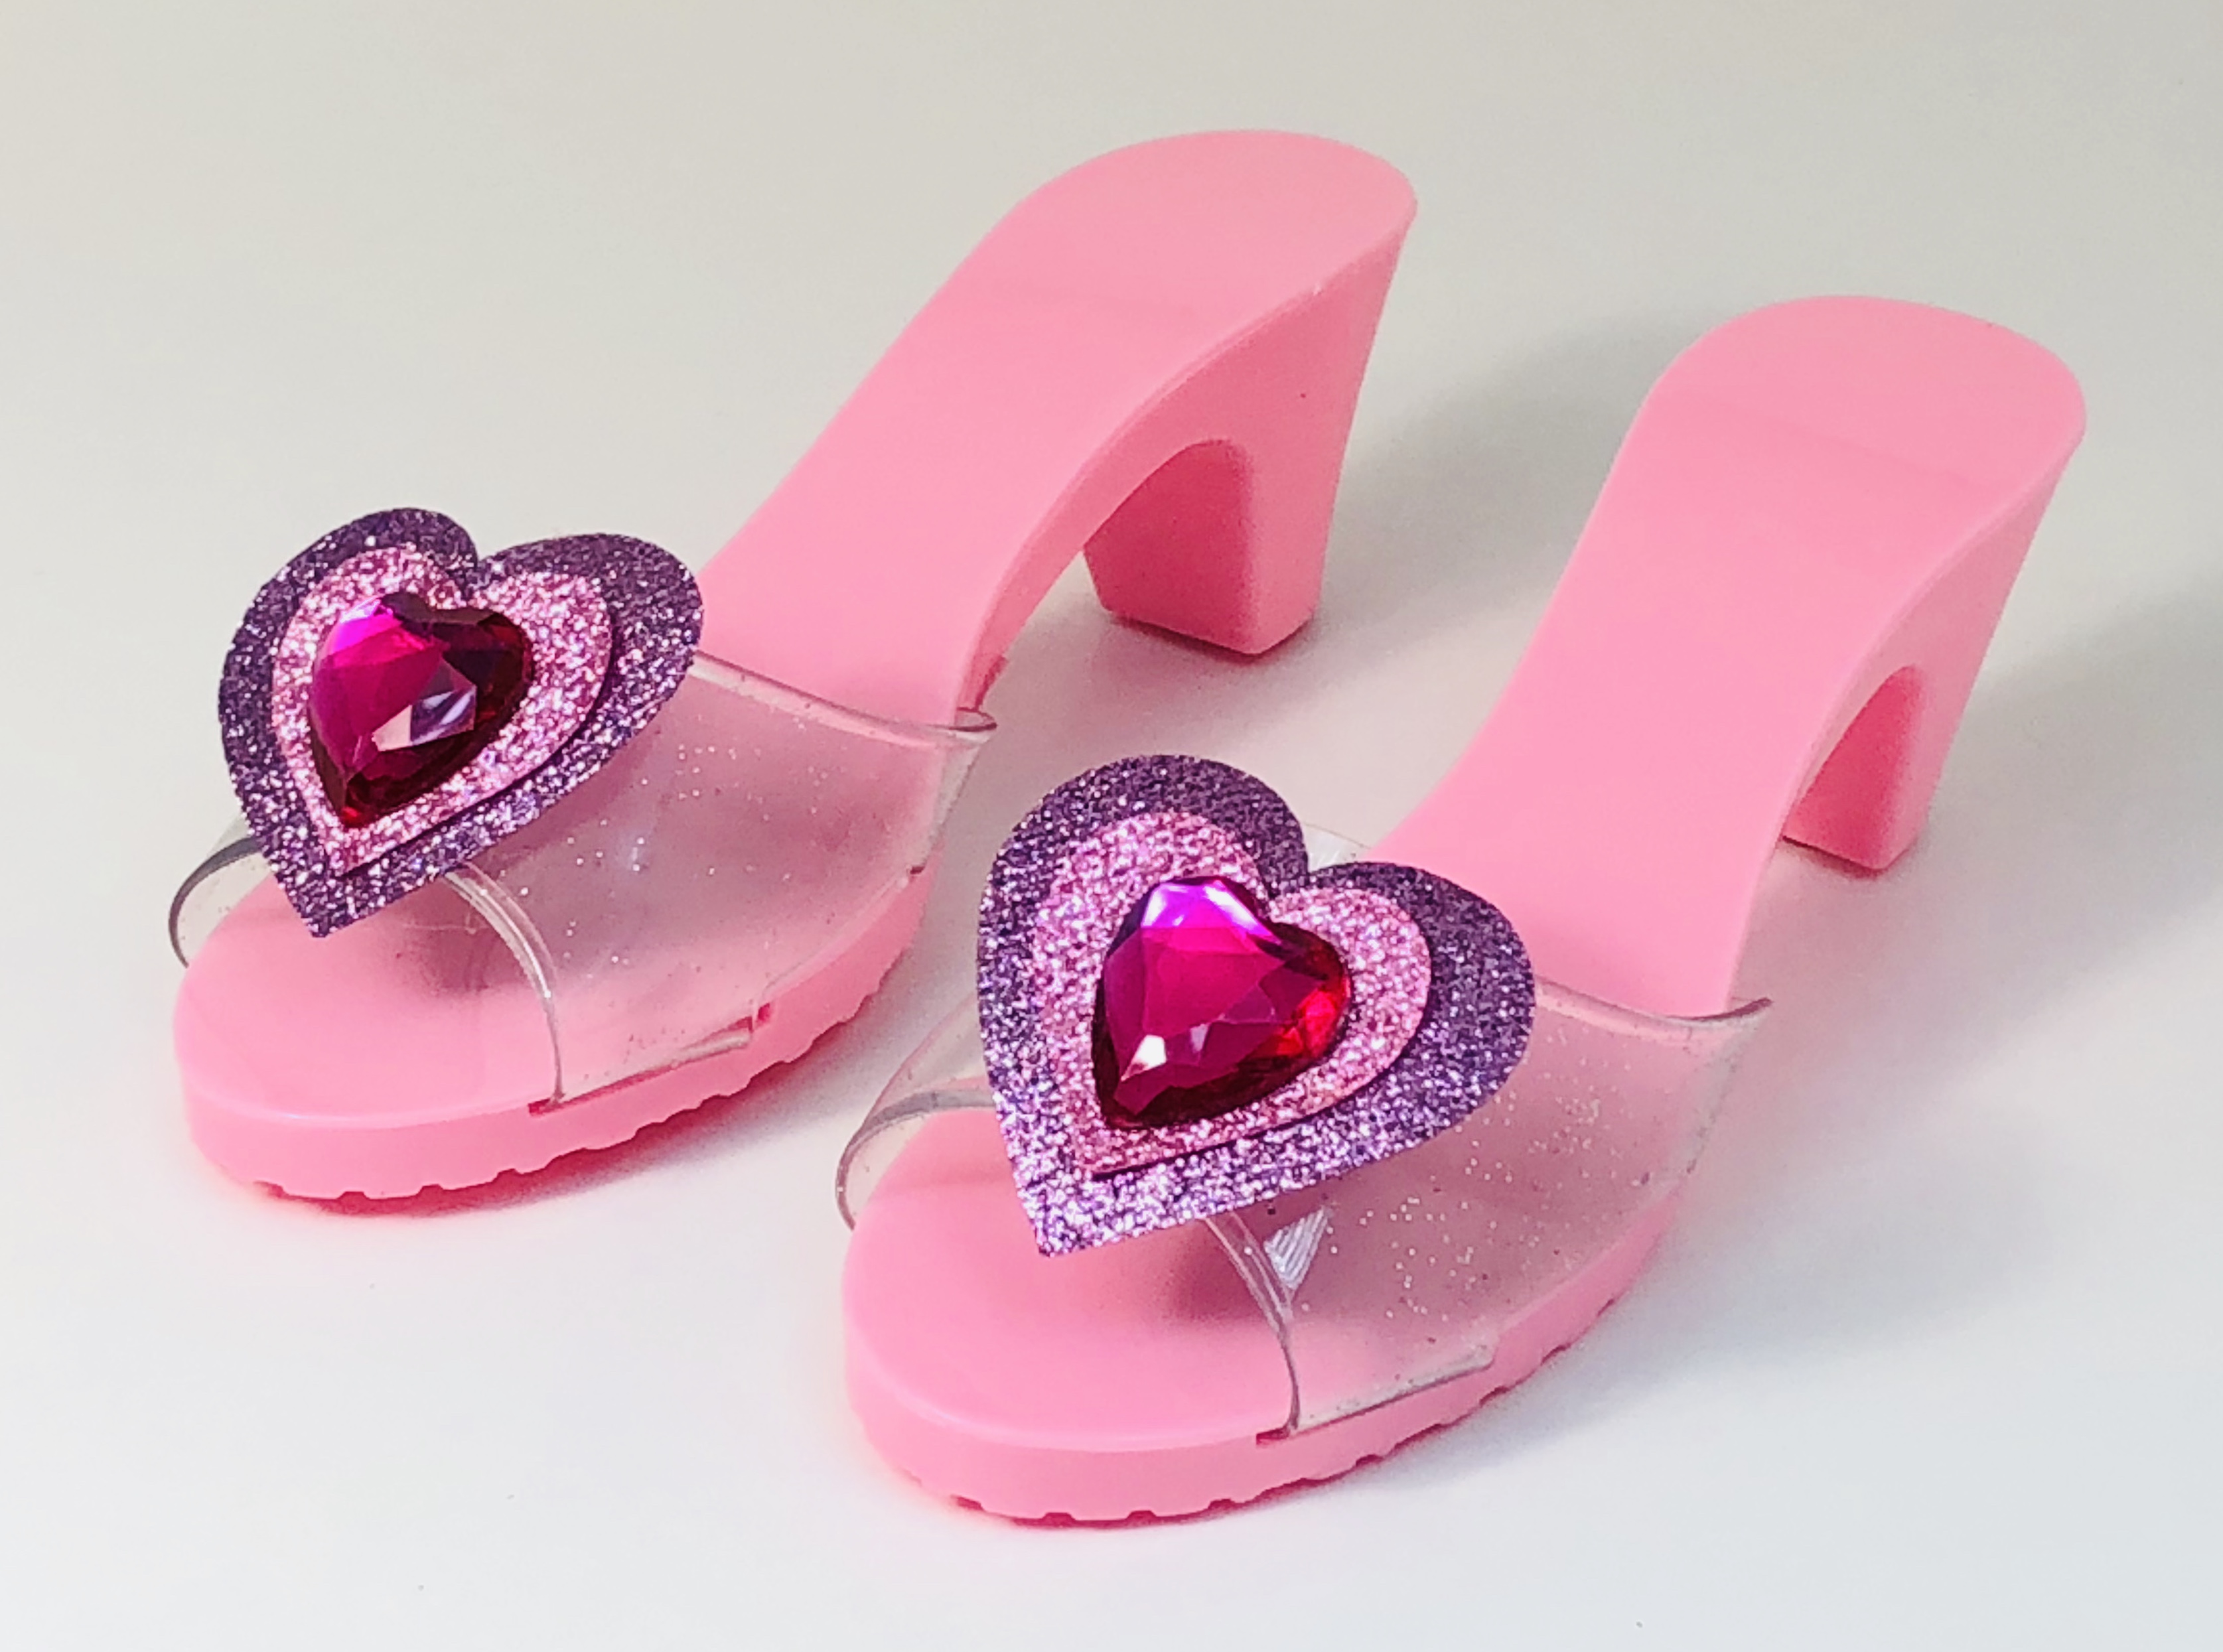 ALL DRESSED UP HEART SPARKLE SHOES - image 1 of 2